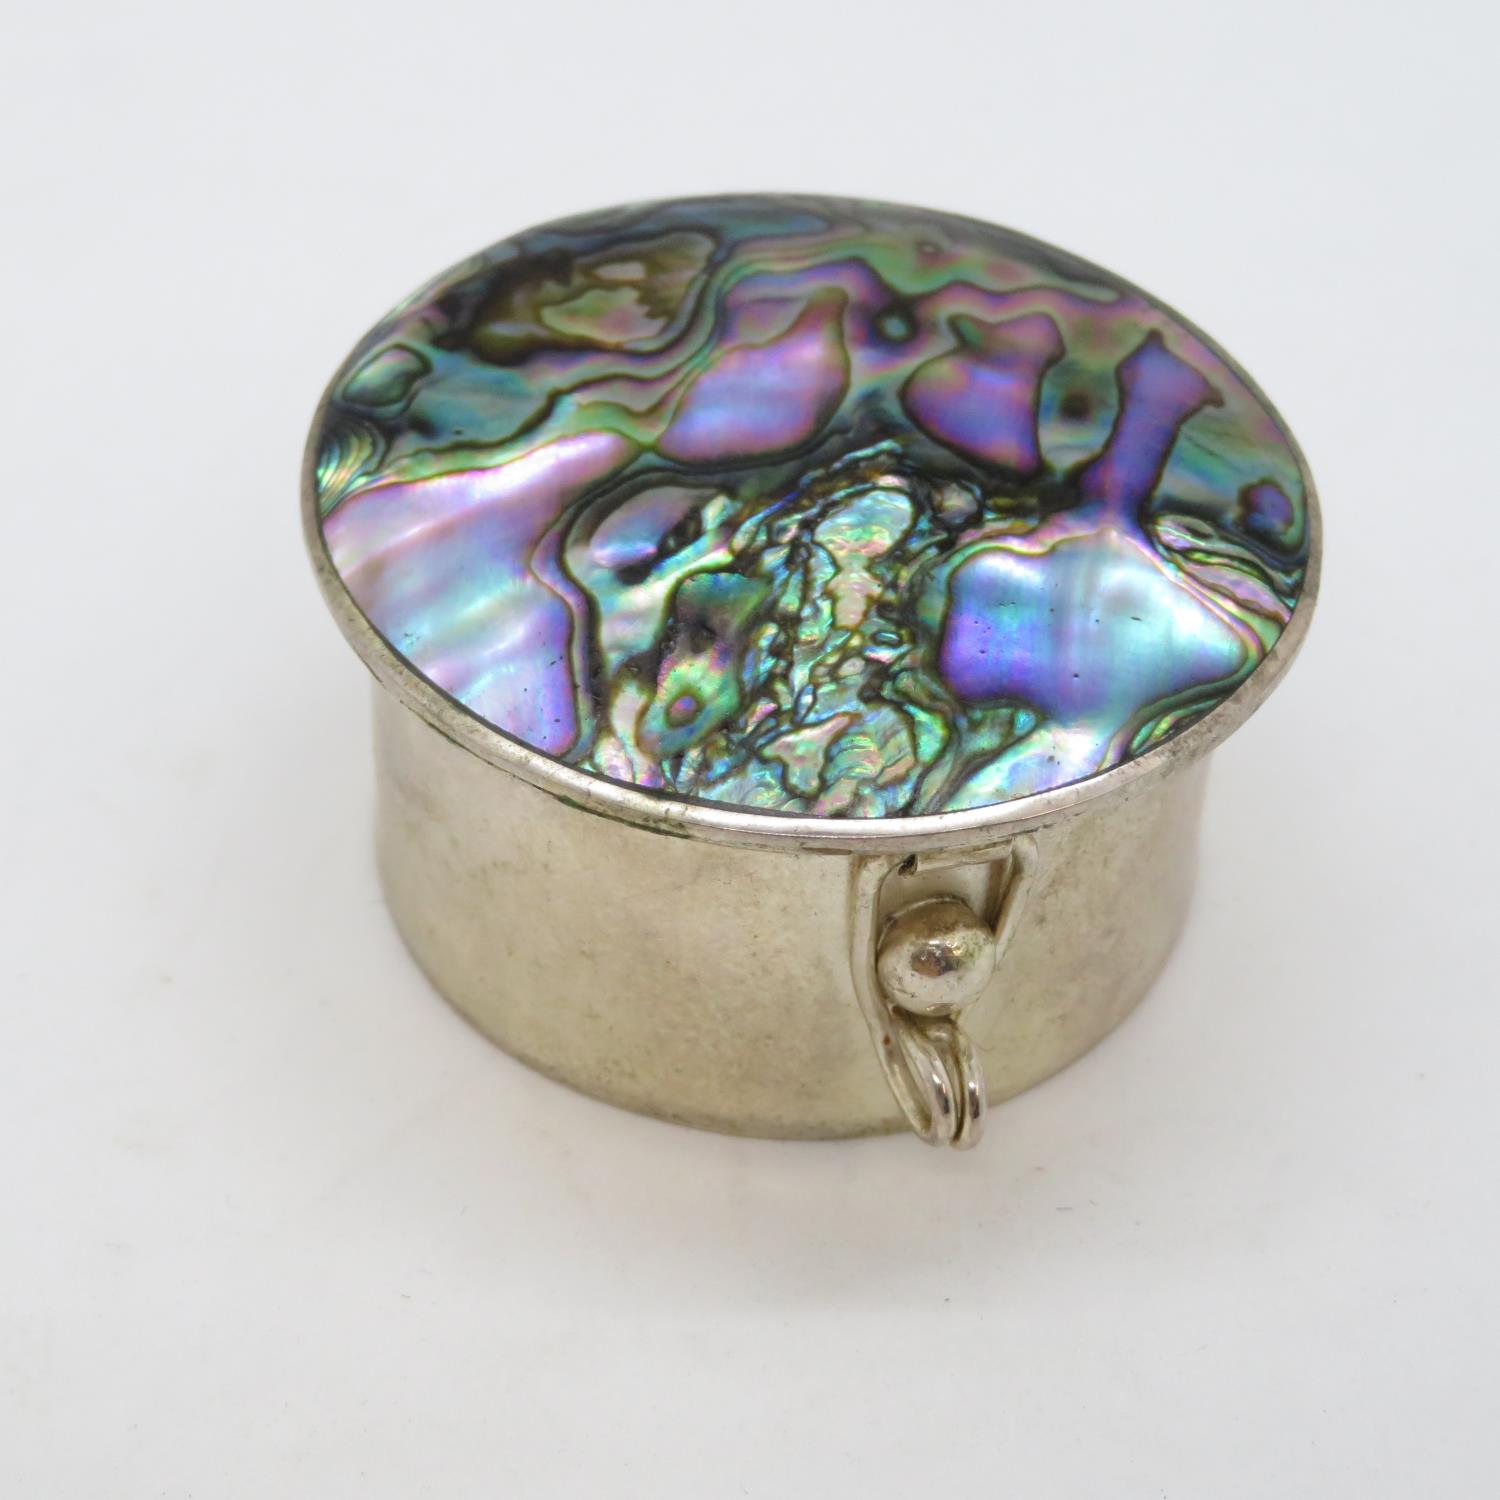 Silver and abalone shell trinket box